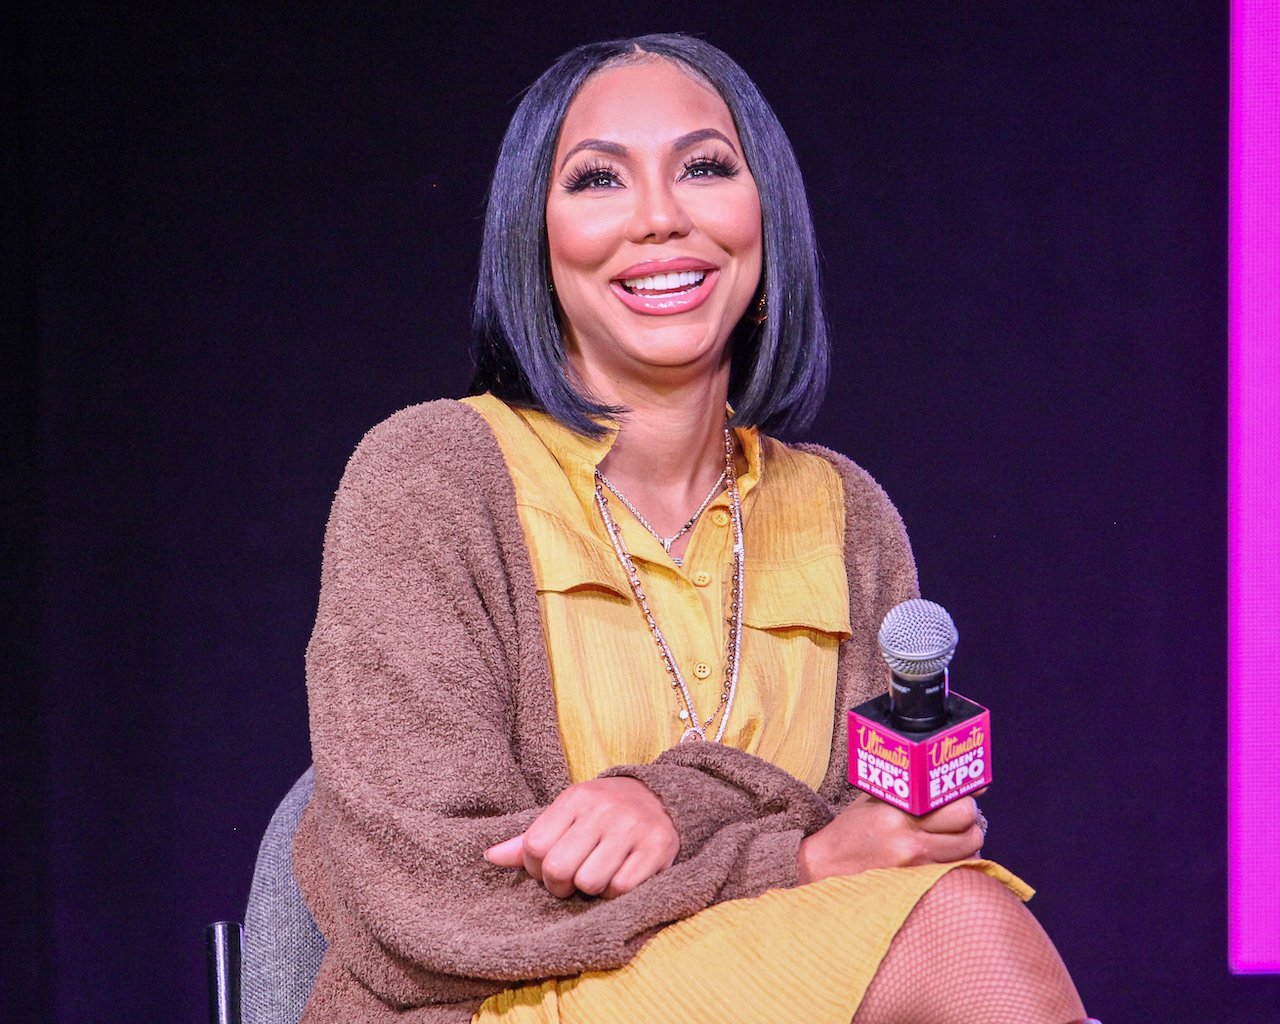 Tamar Braxton smiles during panel discussion; Braxton recently confirmed she's single